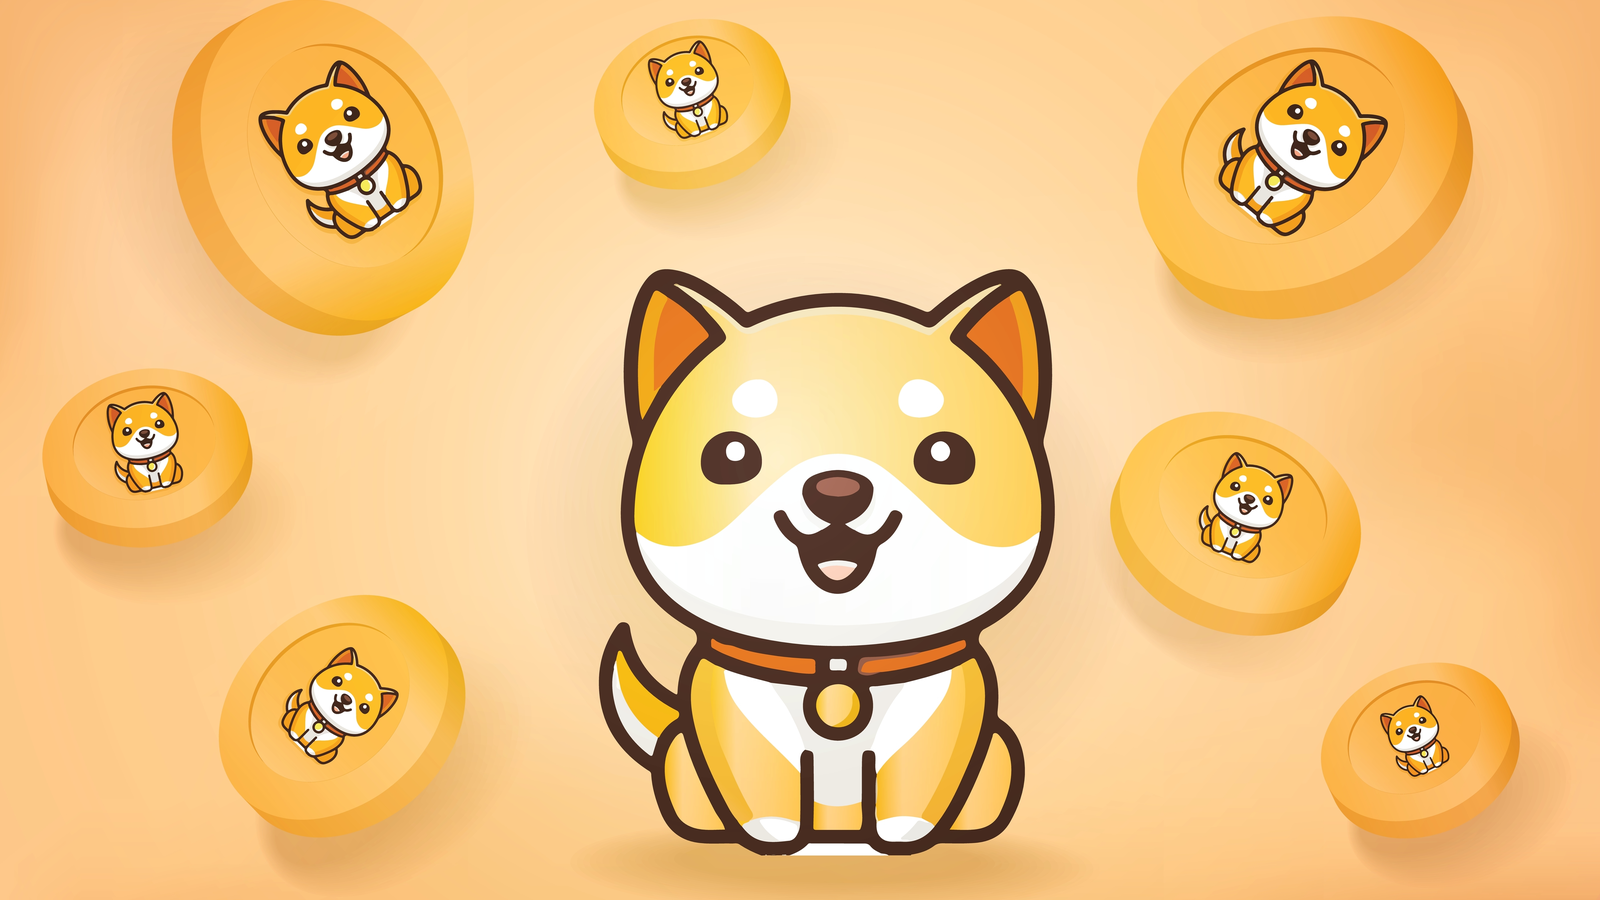 Graphic of Baby Doge Coin (BABYDOGE) mascot on sandy orange background representing BabyDogeCoin Price Predictions.